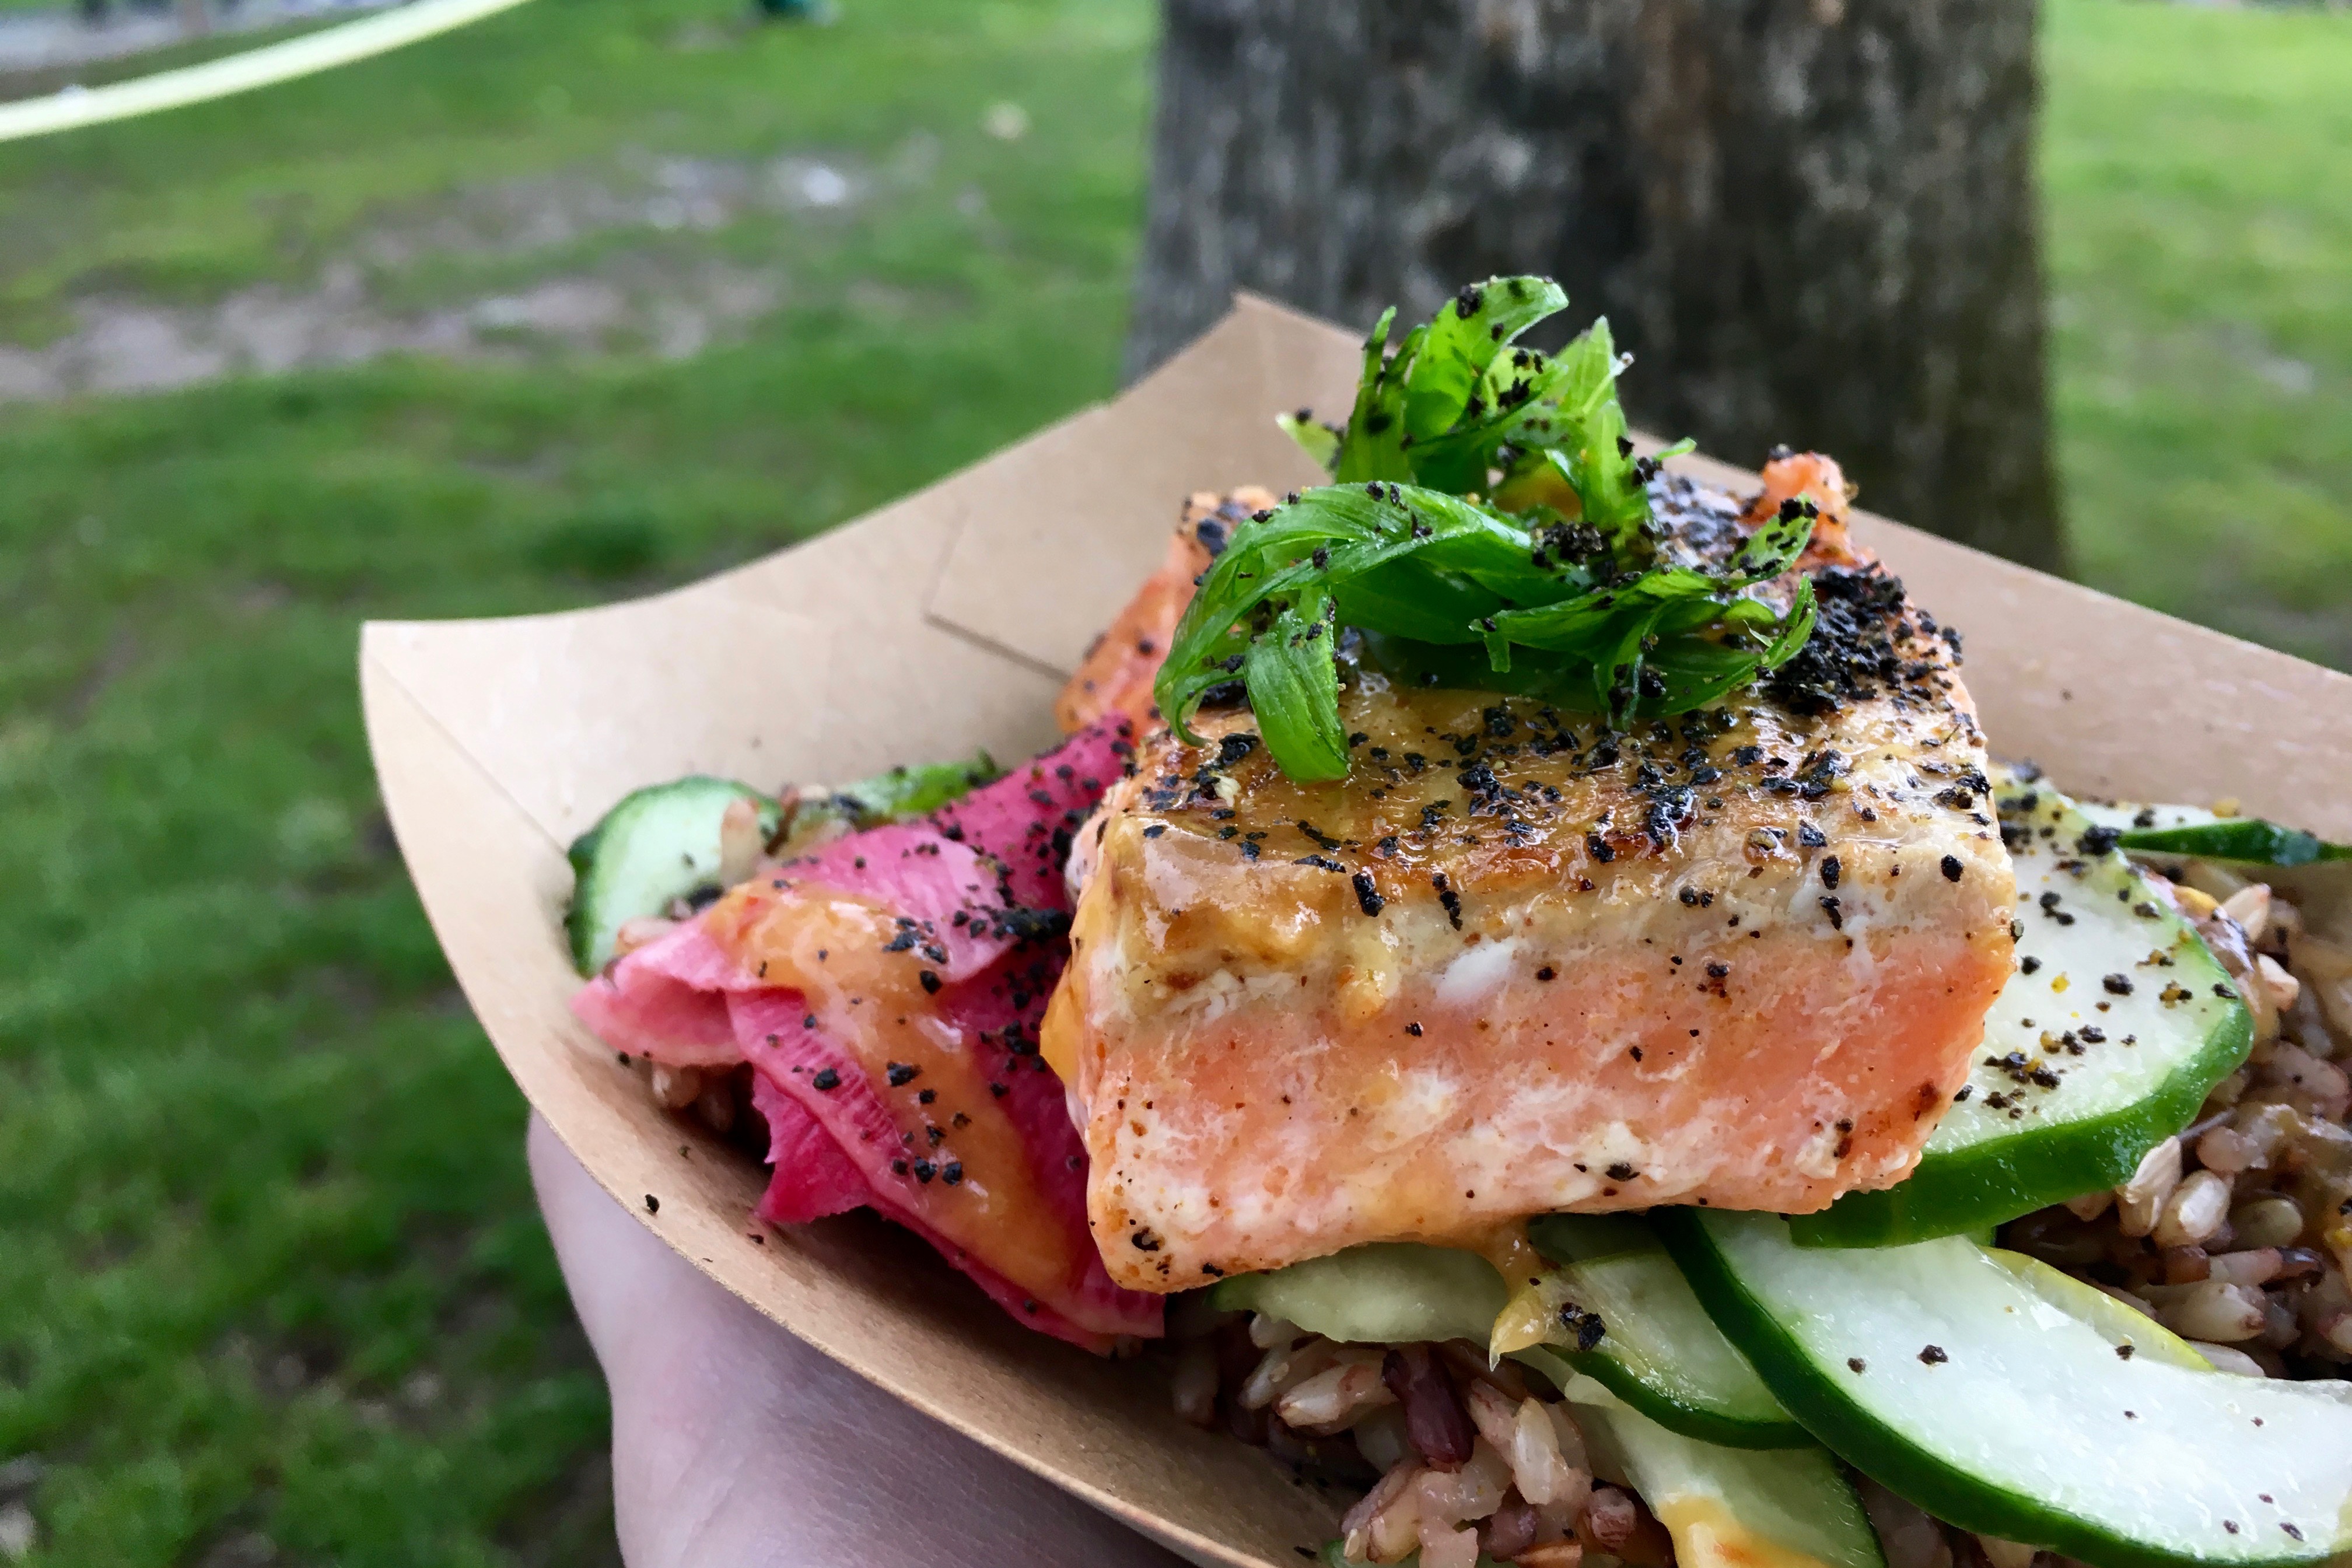 Salad Days Are Gone: I Went to Sweetgreen's Music Festival